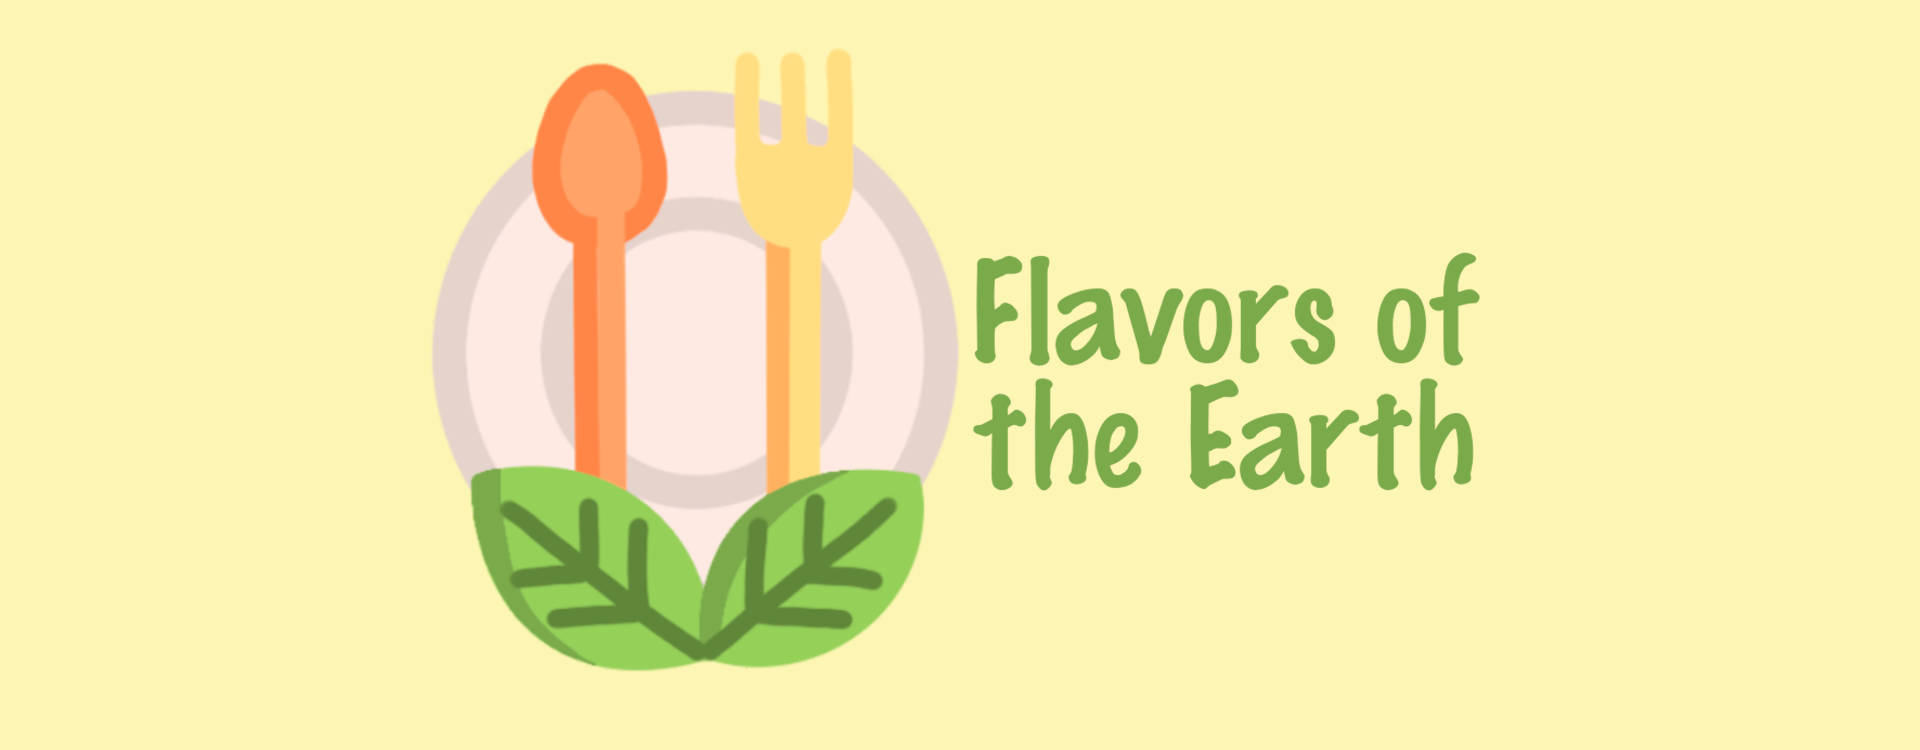 Flavors of the Earth